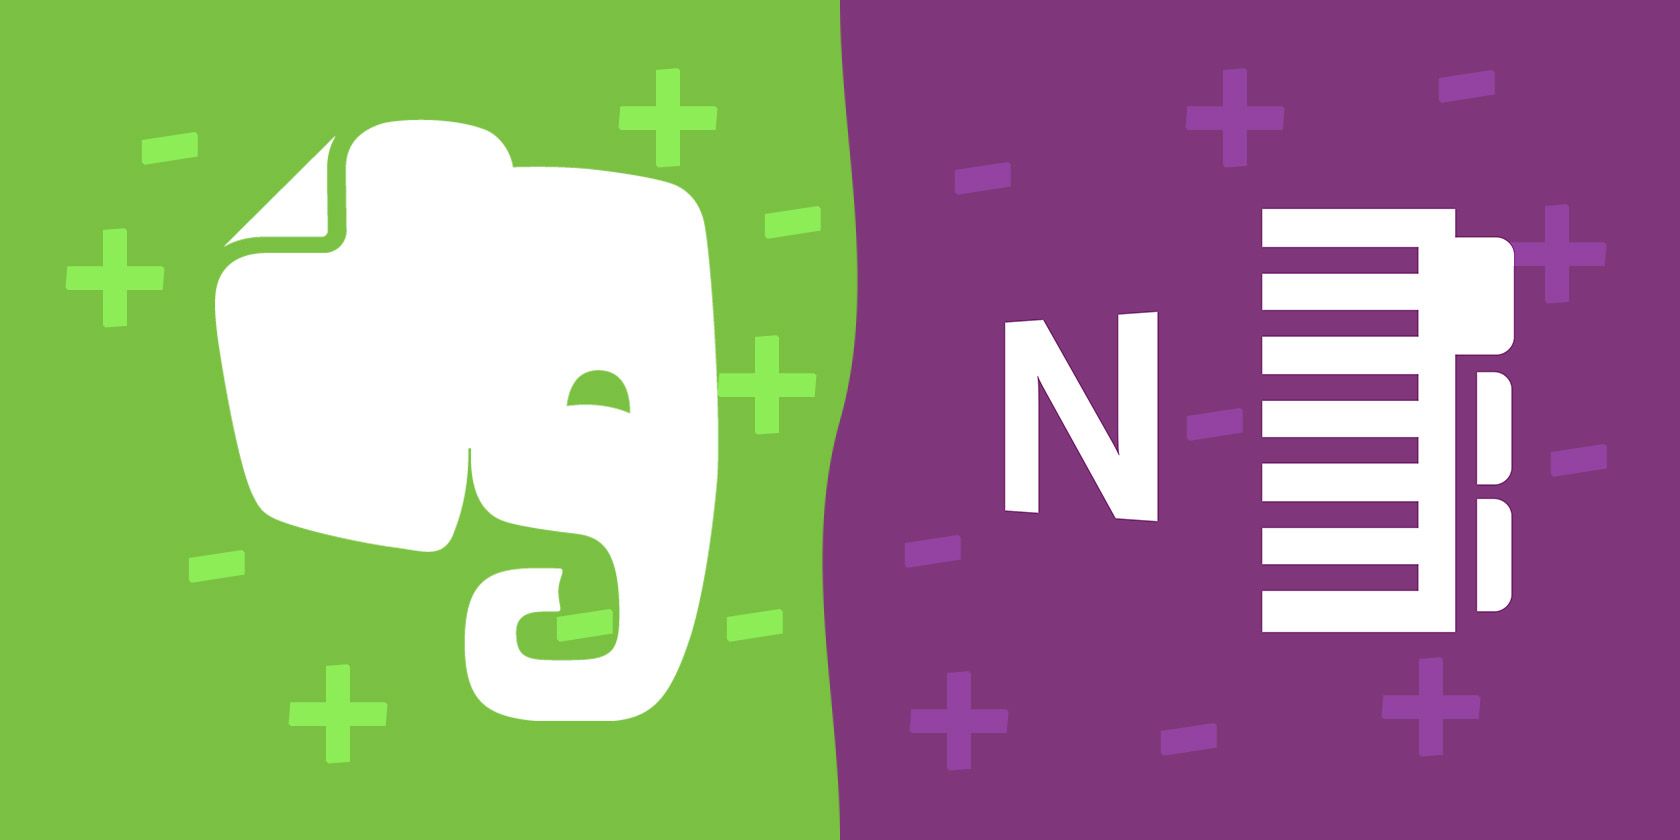 use of evernote app